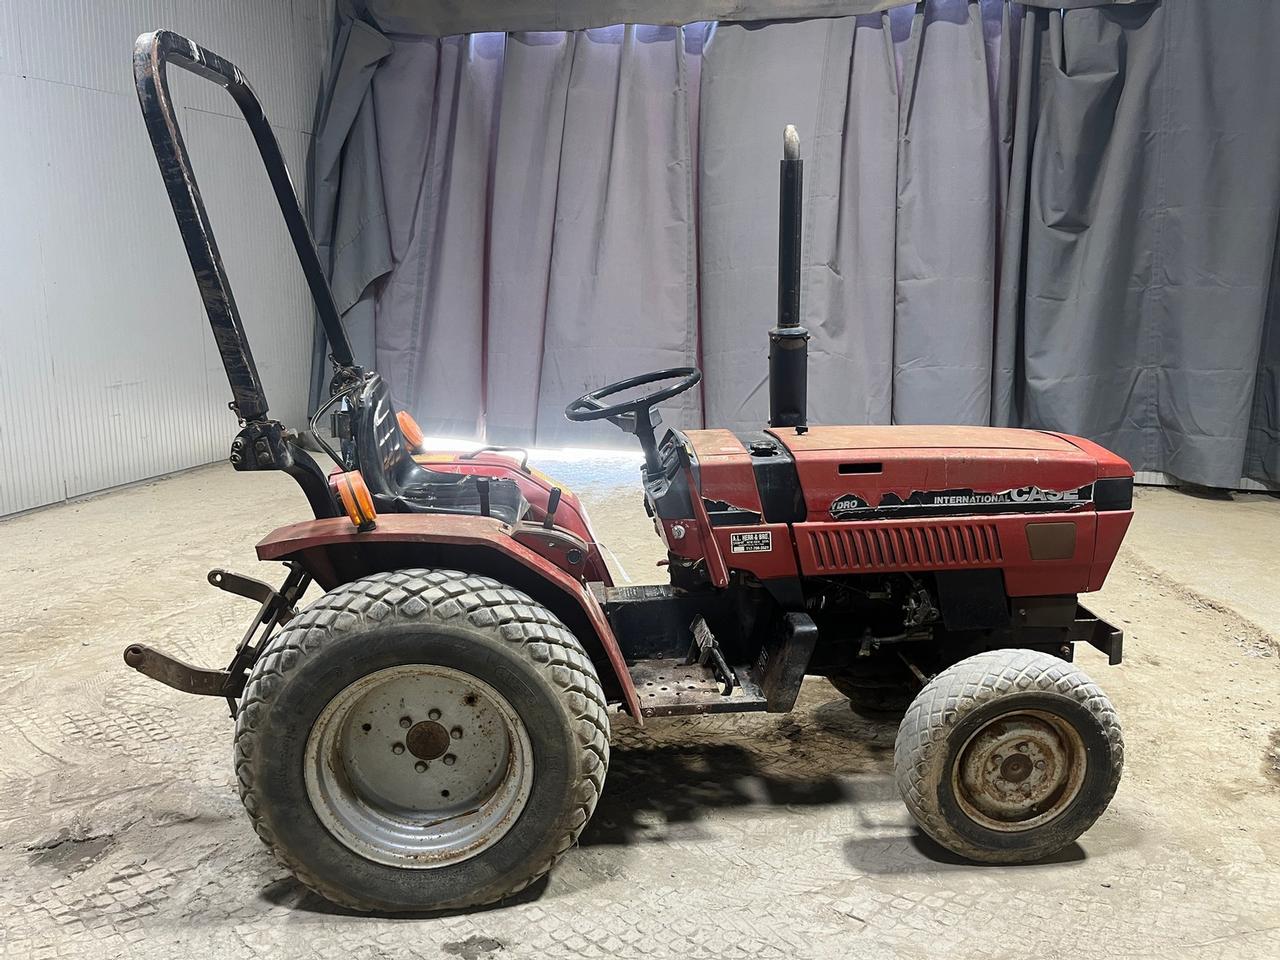 Case IH 235 Tractor